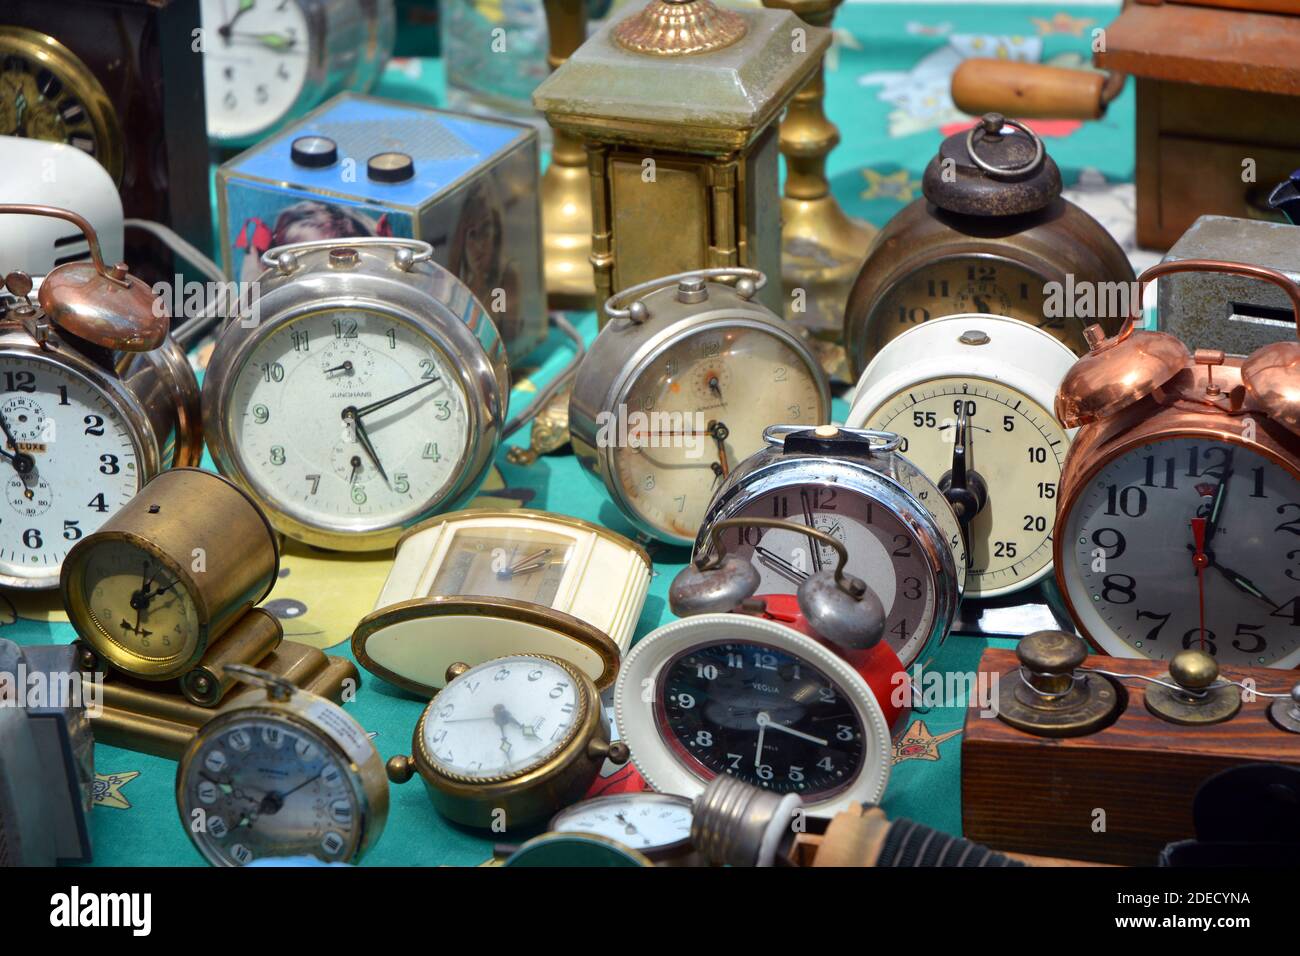 Castelnuovo don Bosco, Piedmont, Italy -04/25/2019- The annual antiques and vintage market Stock Photo